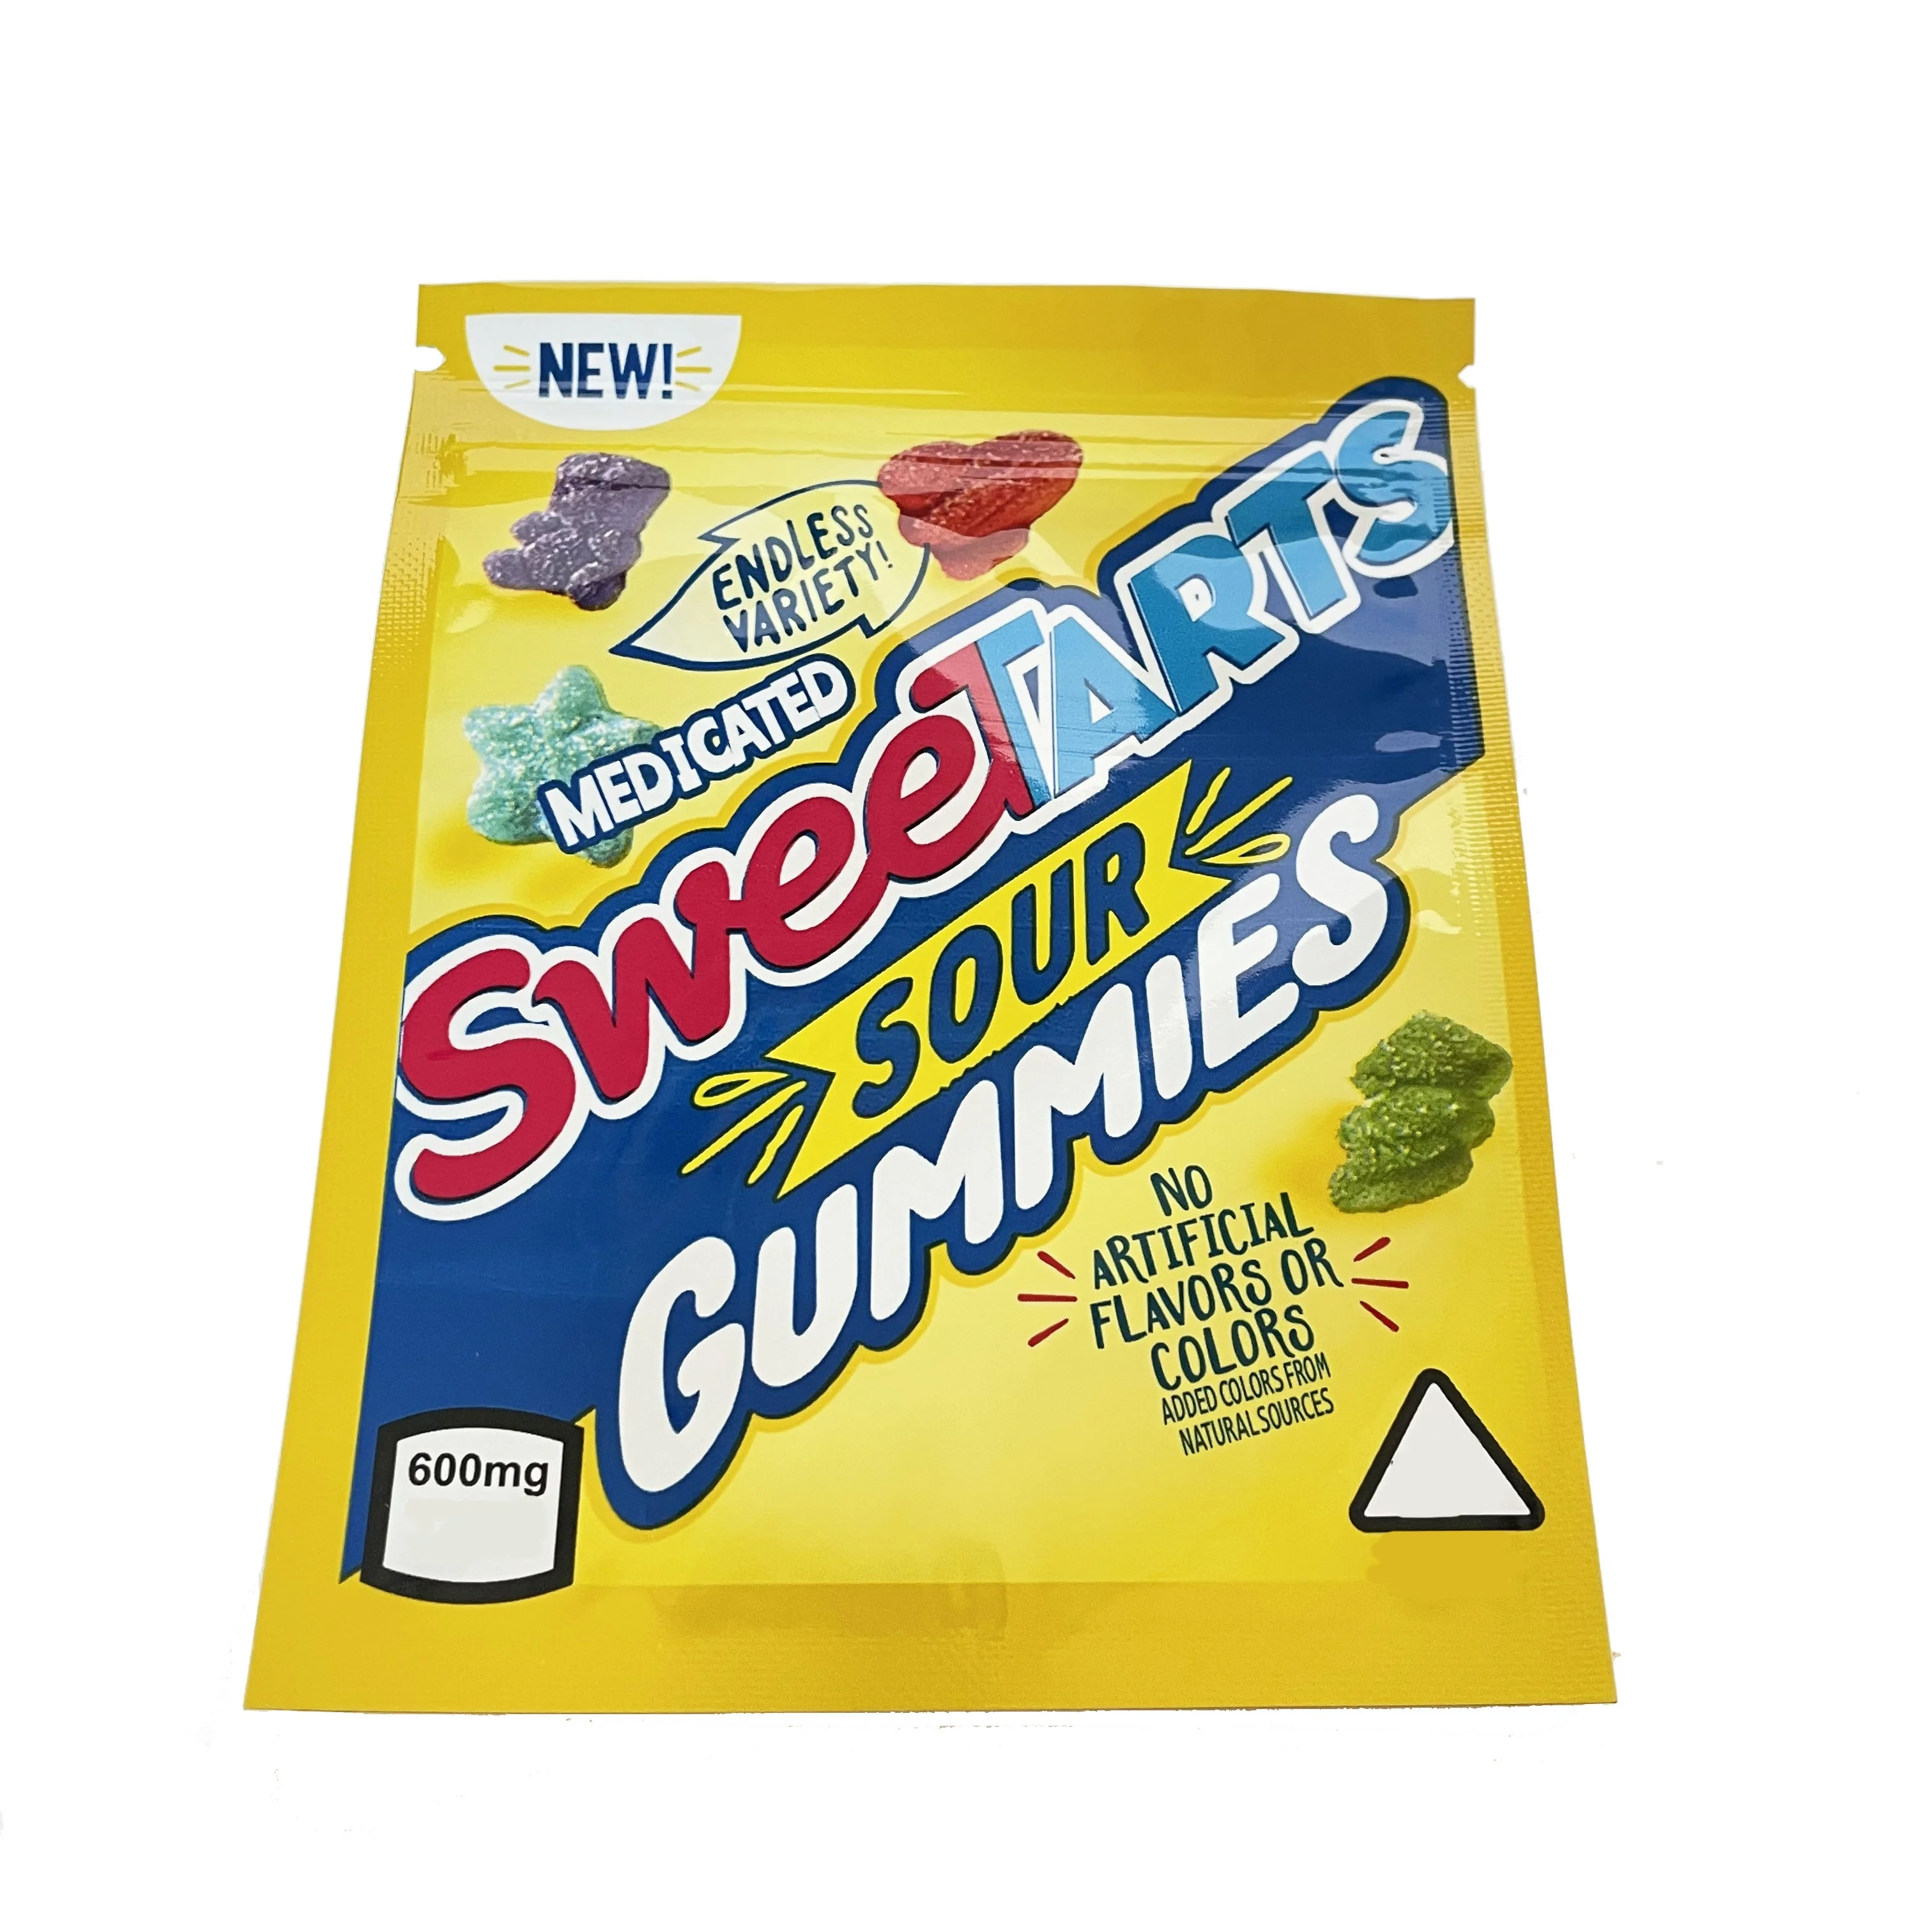 

Newest 600mg Sweetarts sour gummies weedtarts gummy zipper bags edibles medicated candy mylar packaging bags